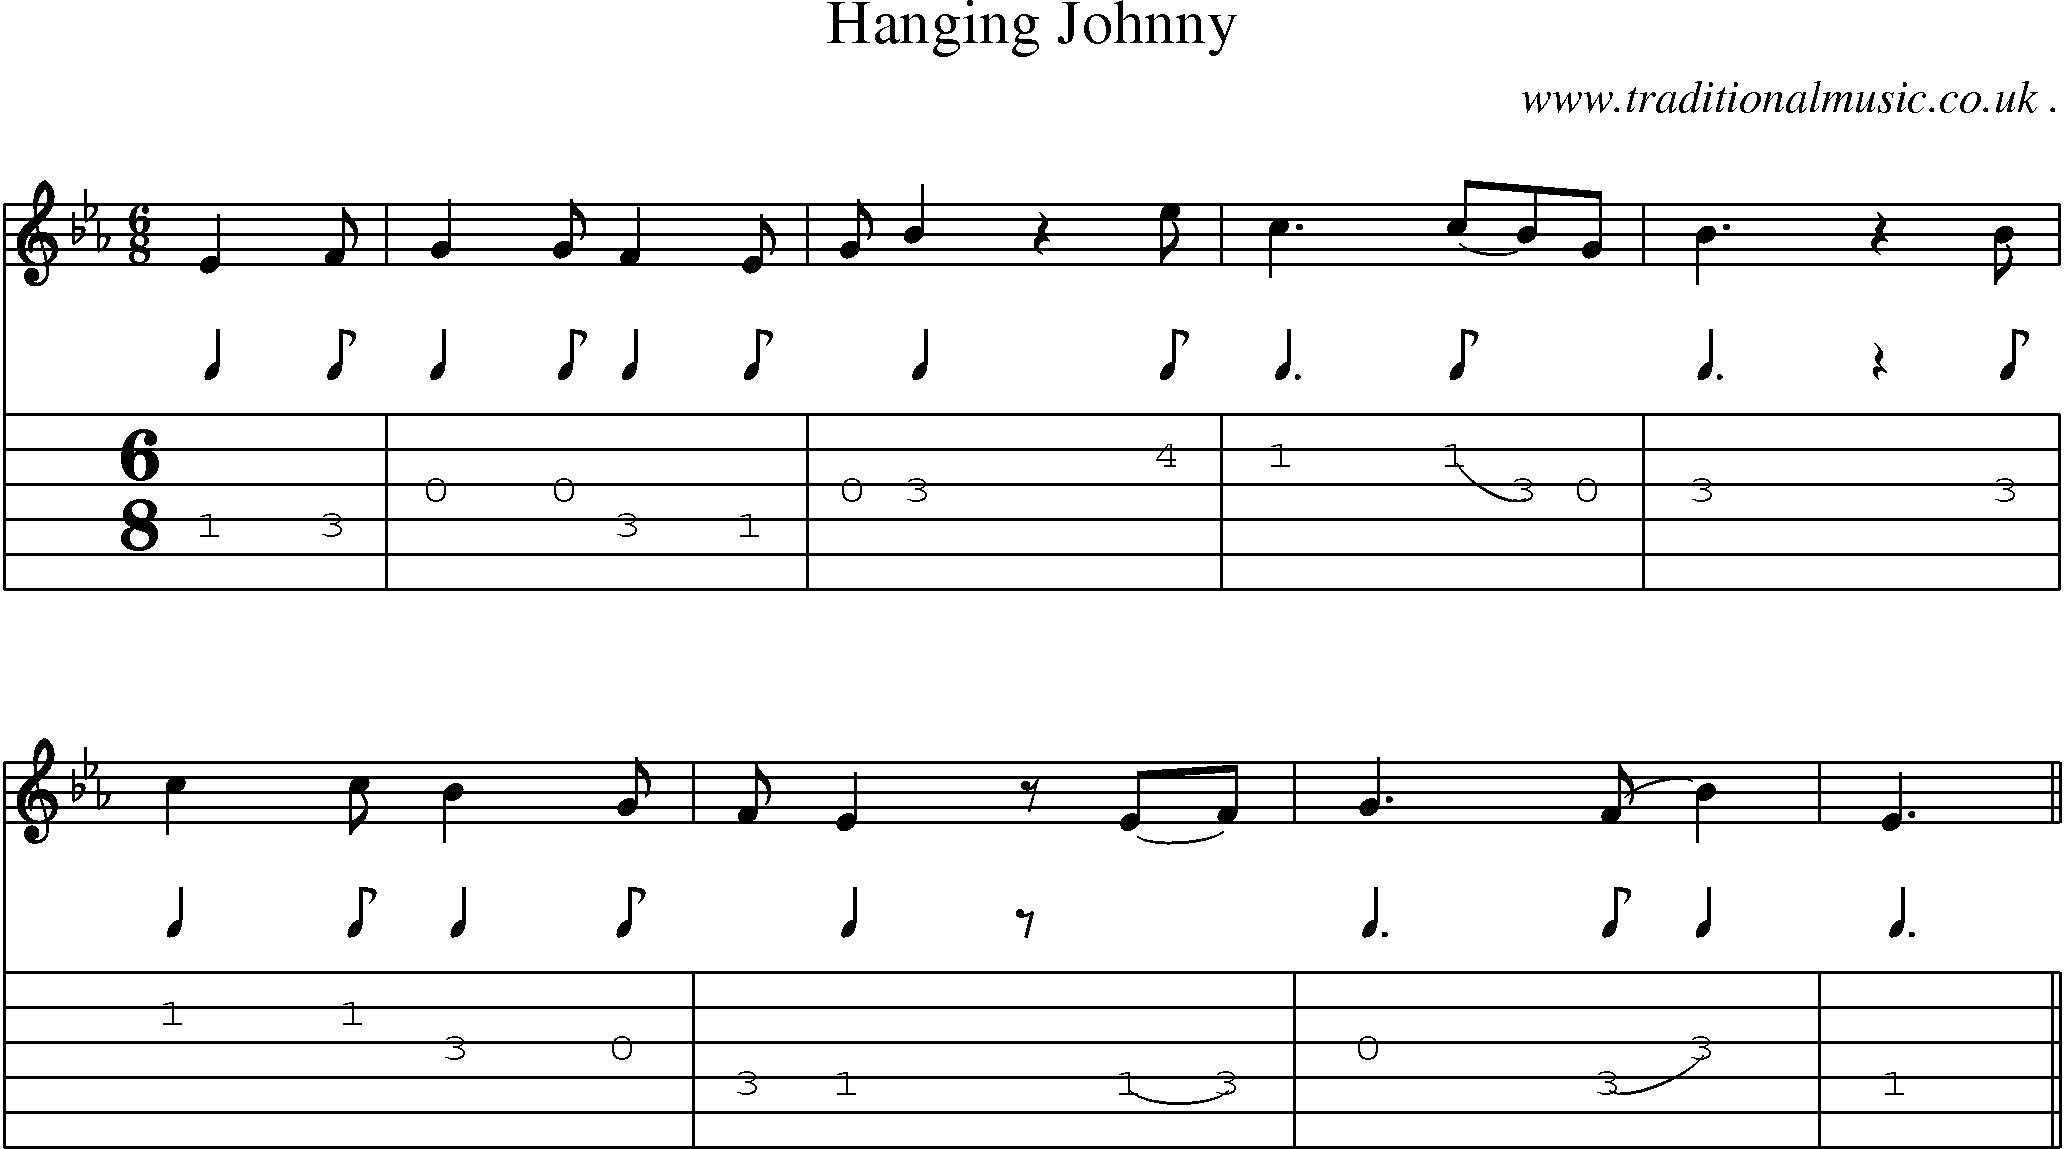 Sheet-Music and Guitar Tabs for Hanging Johnny